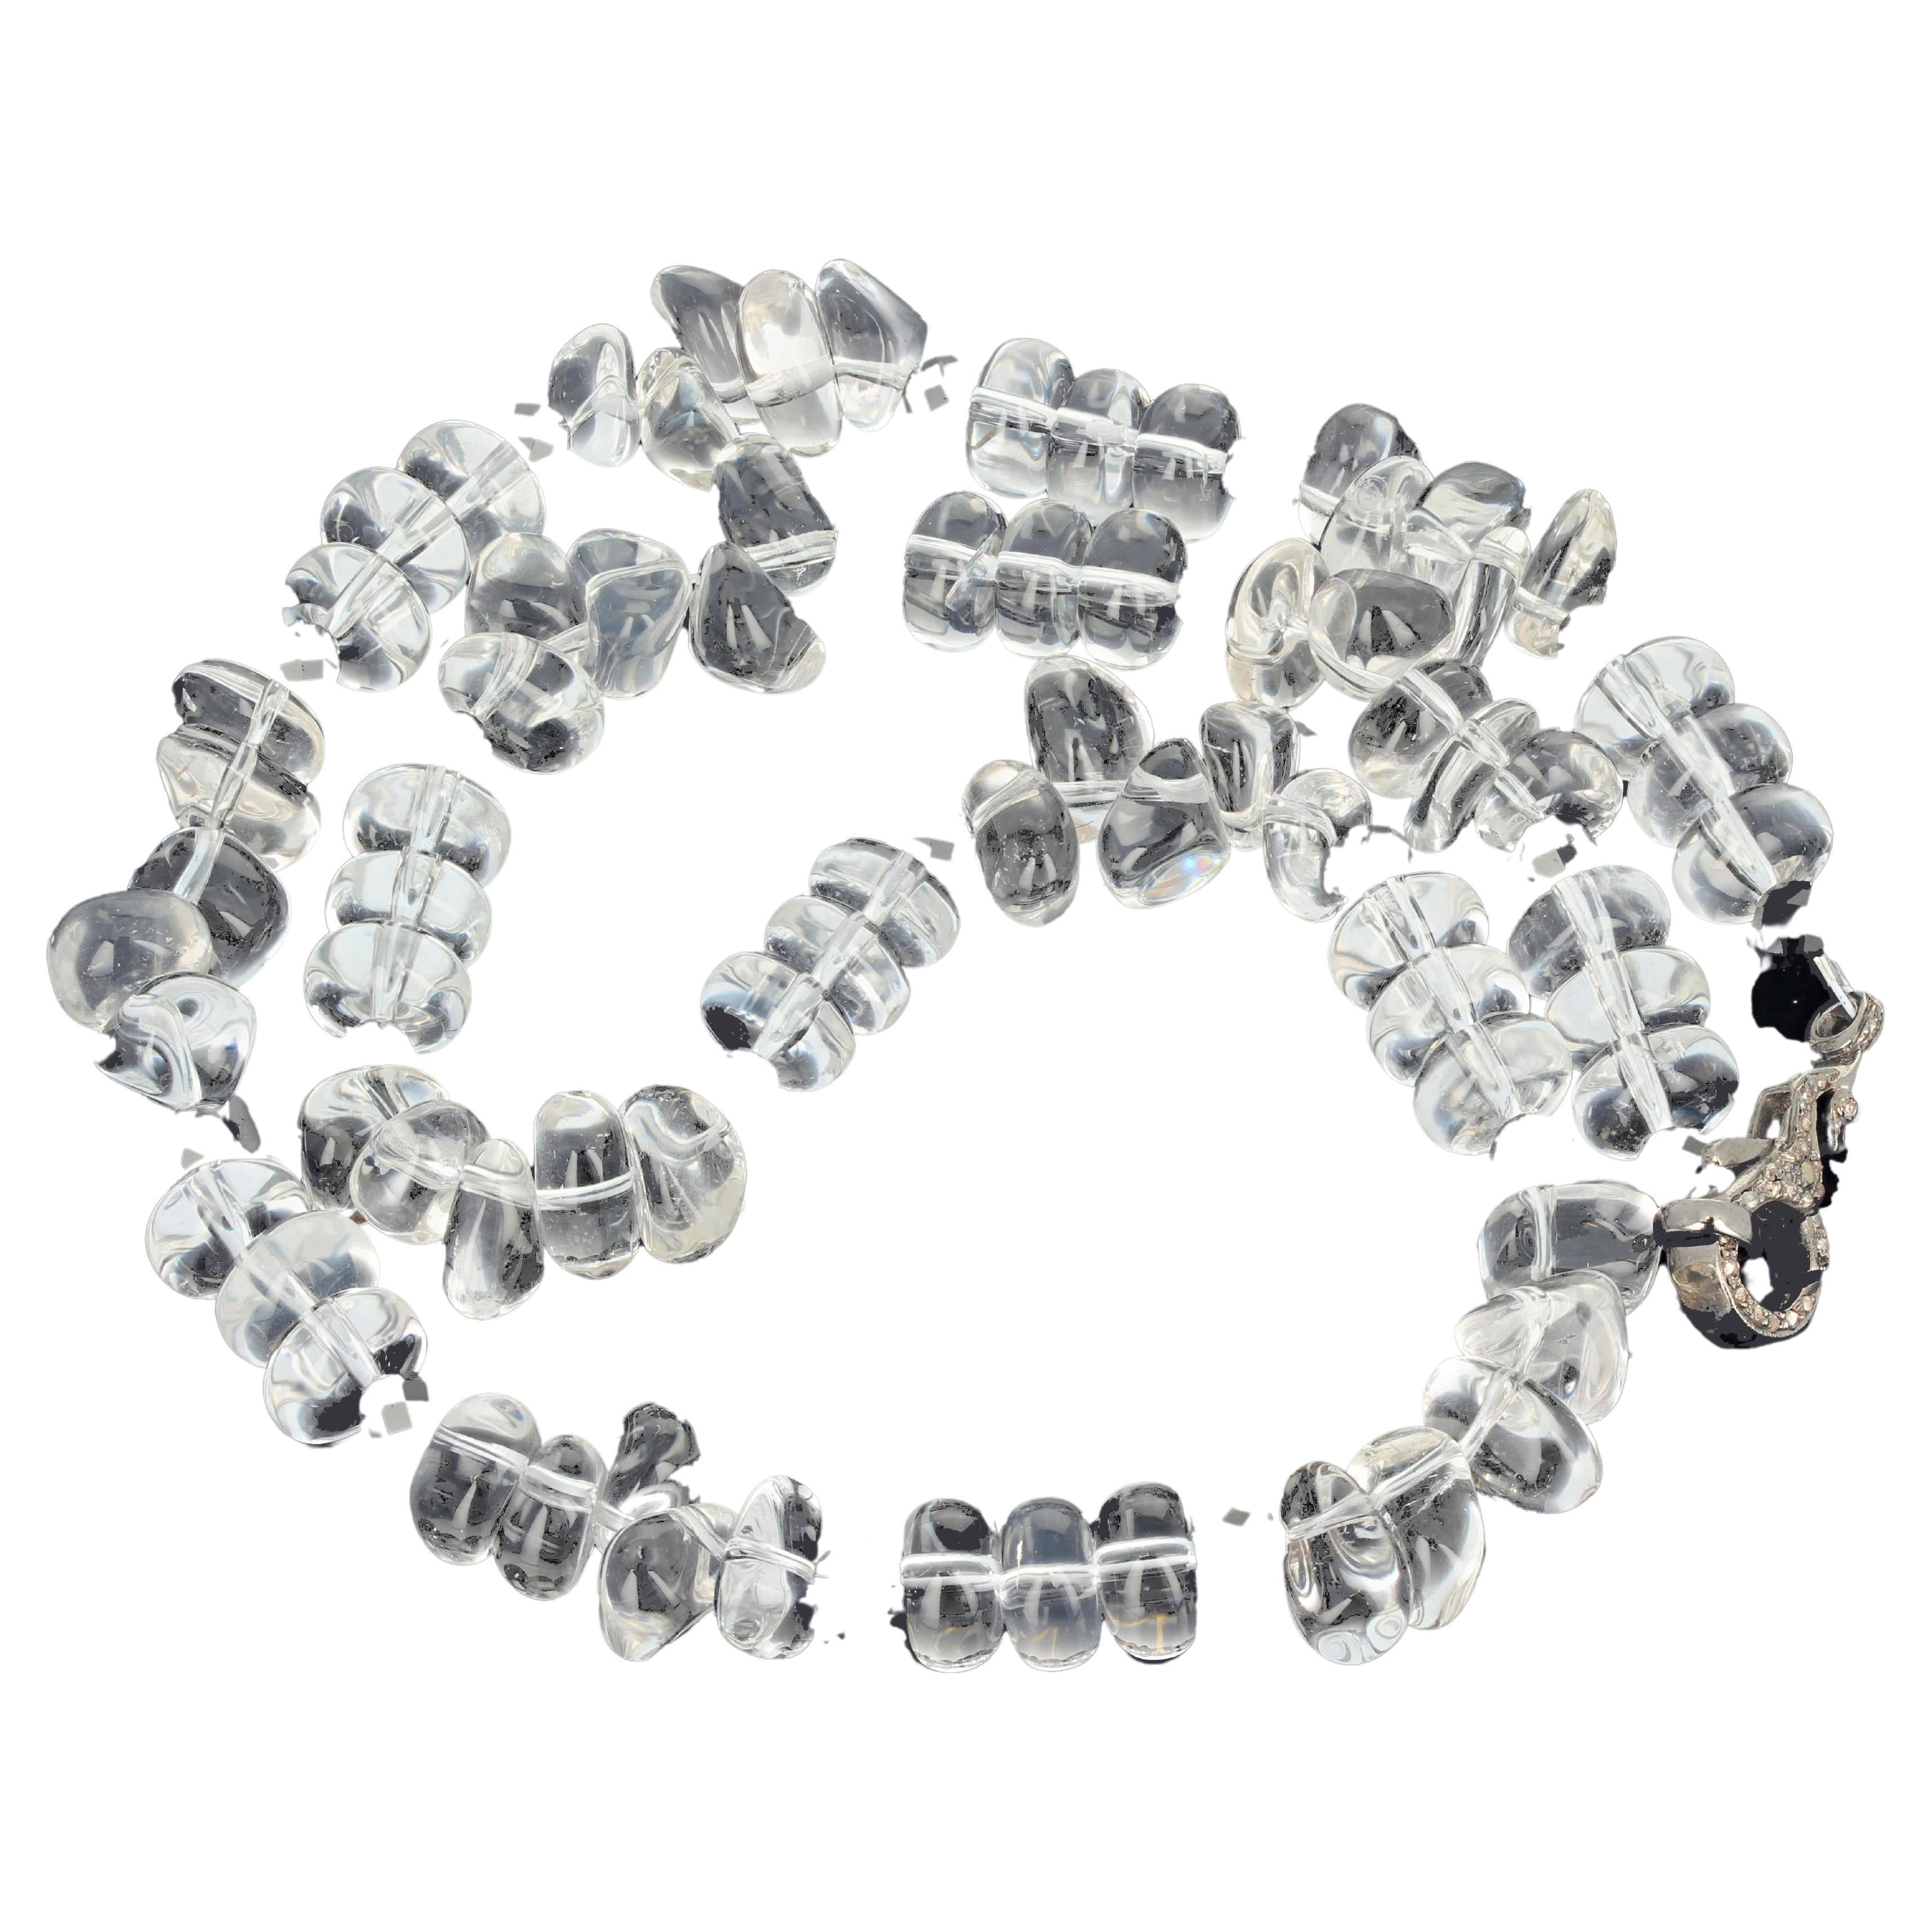 This  beautiful 17.5 inch natural Quartz necklace is enhanced with glittering gem cut real natural black Spinel and set with a darkened sterling silver diamond encrusted hook clasp.  The flip-flop of the gemstones makes it show off romantically. 